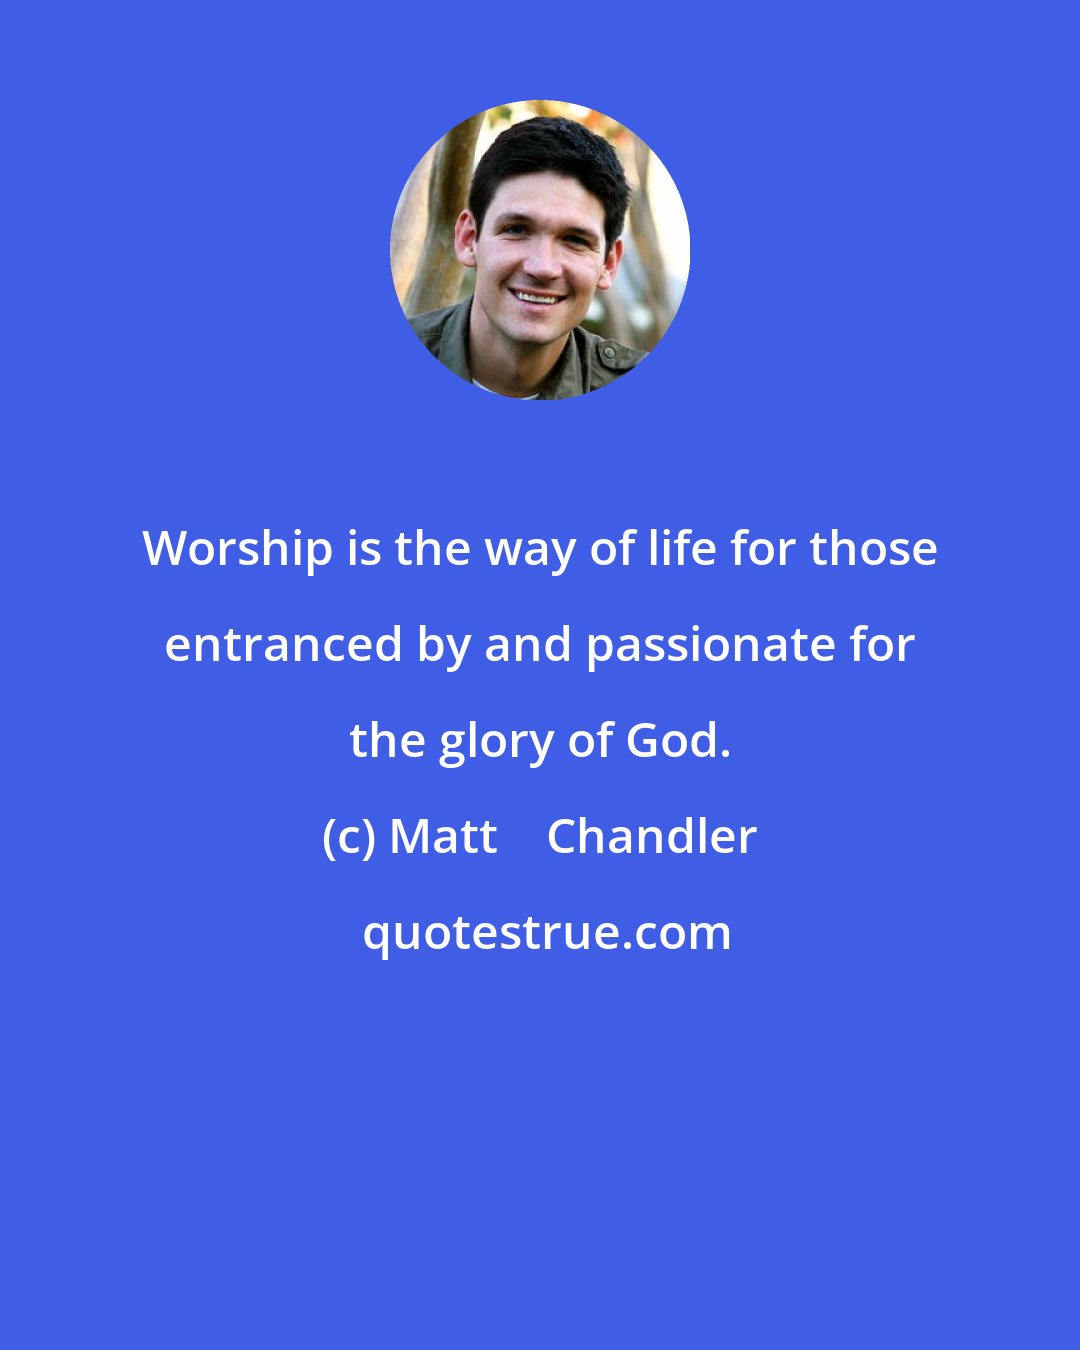 Matt    Chandler: Worship is the way of life for those entranced by and passionate for the glory of God.